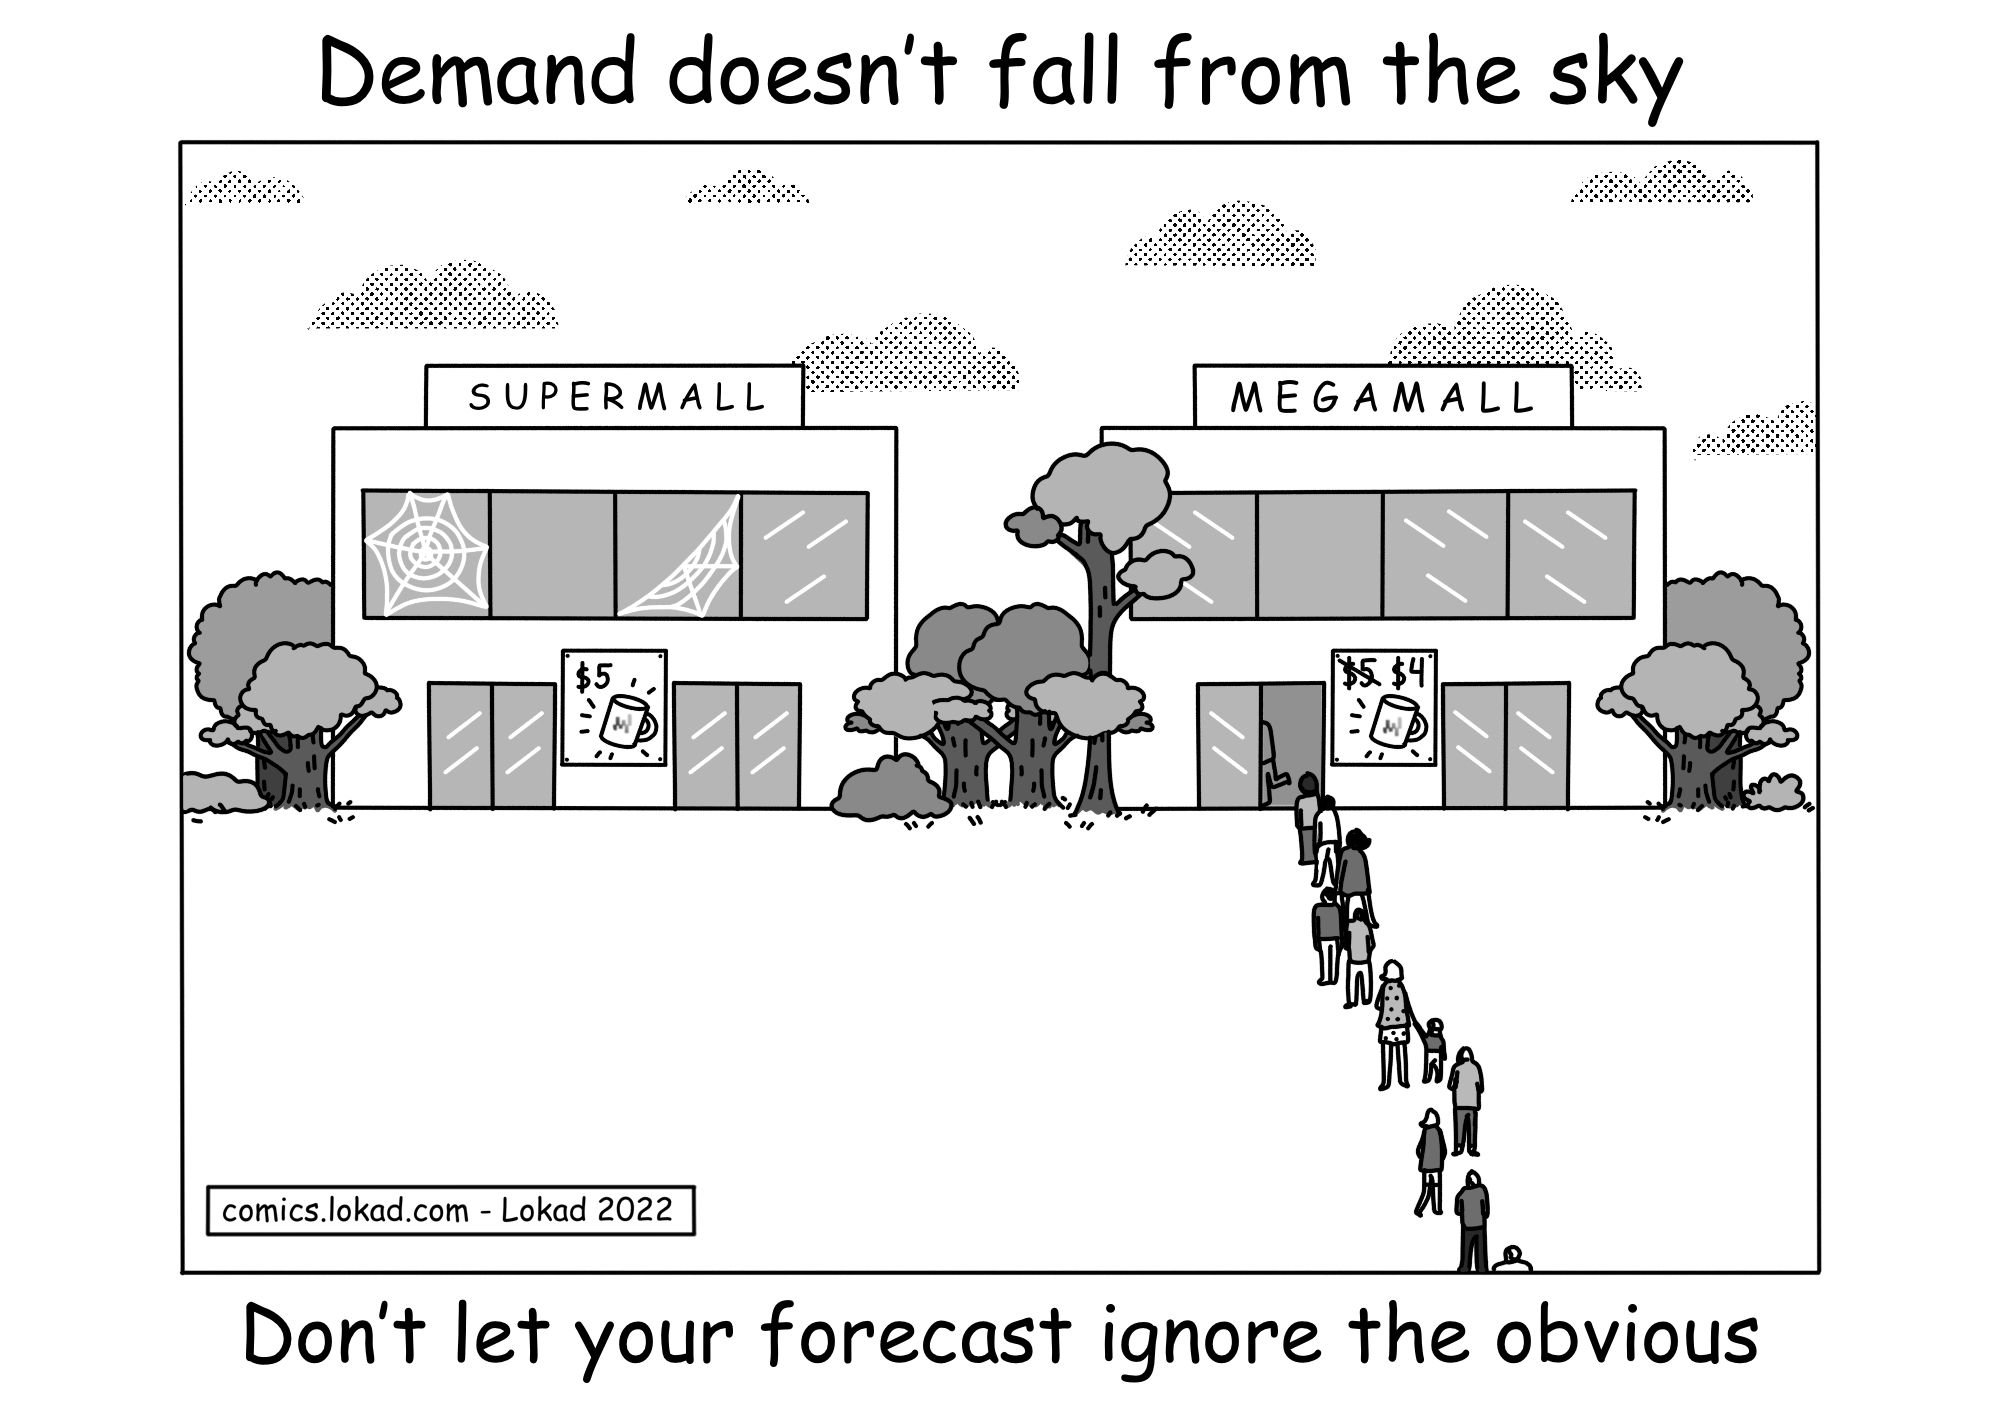 Demand doesn't fall from the sky